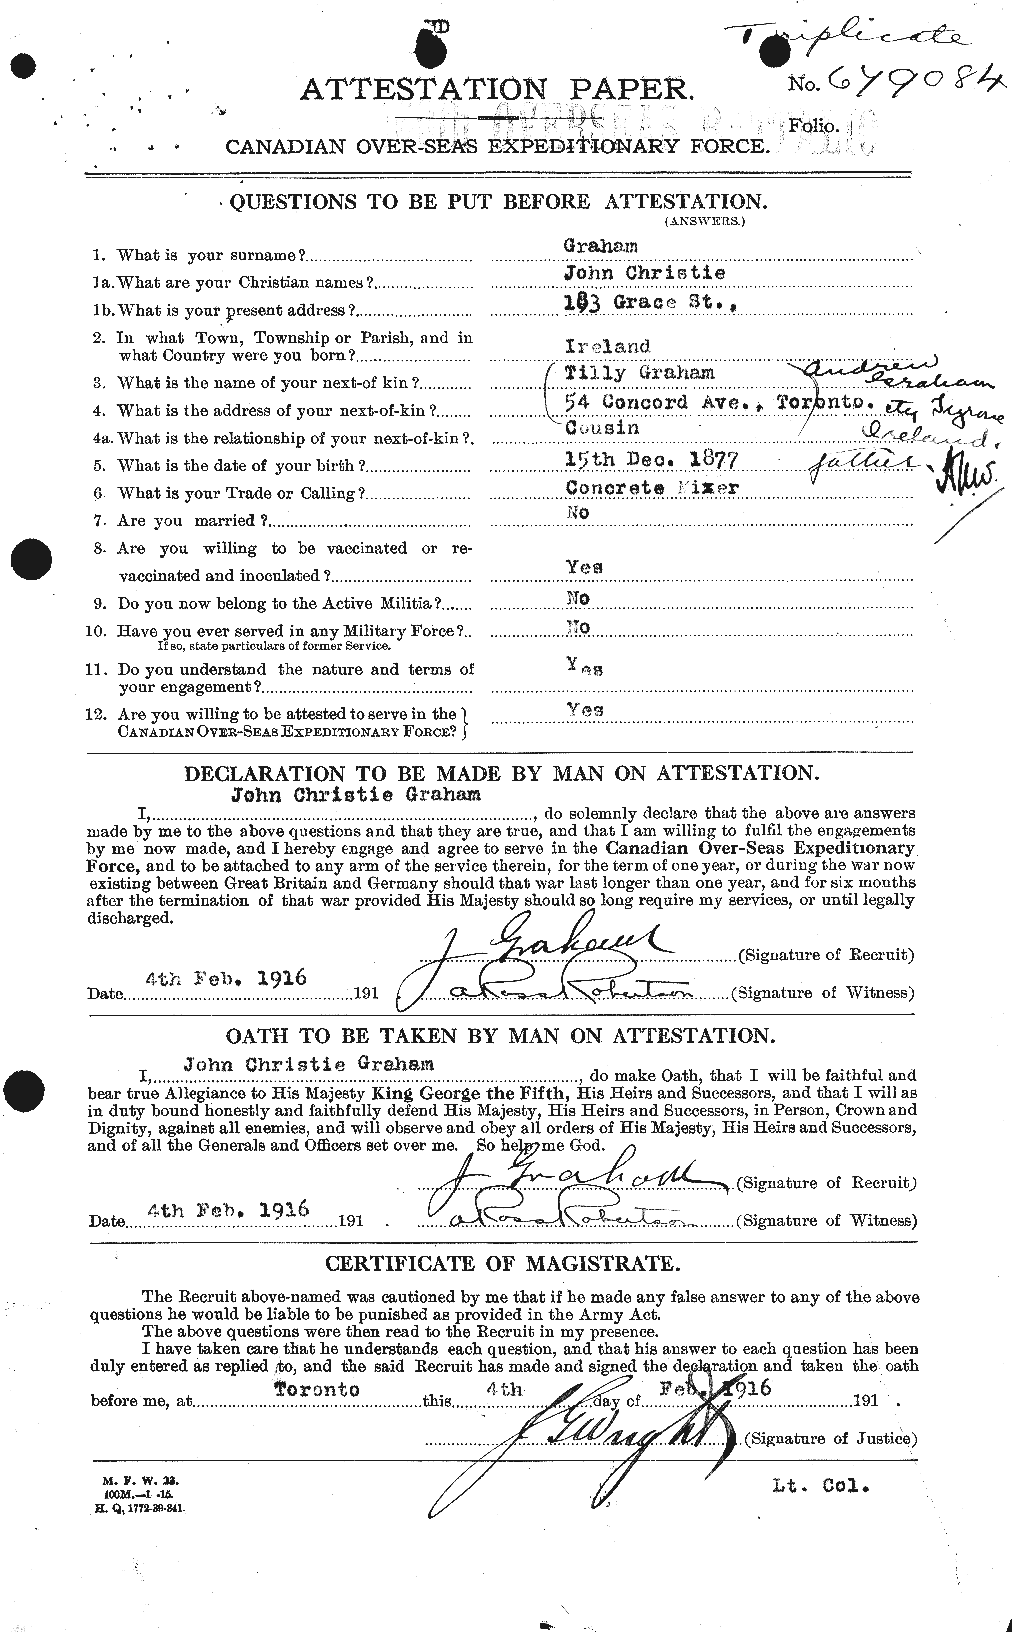 Personnel Records of the First World War - CEF 359161a